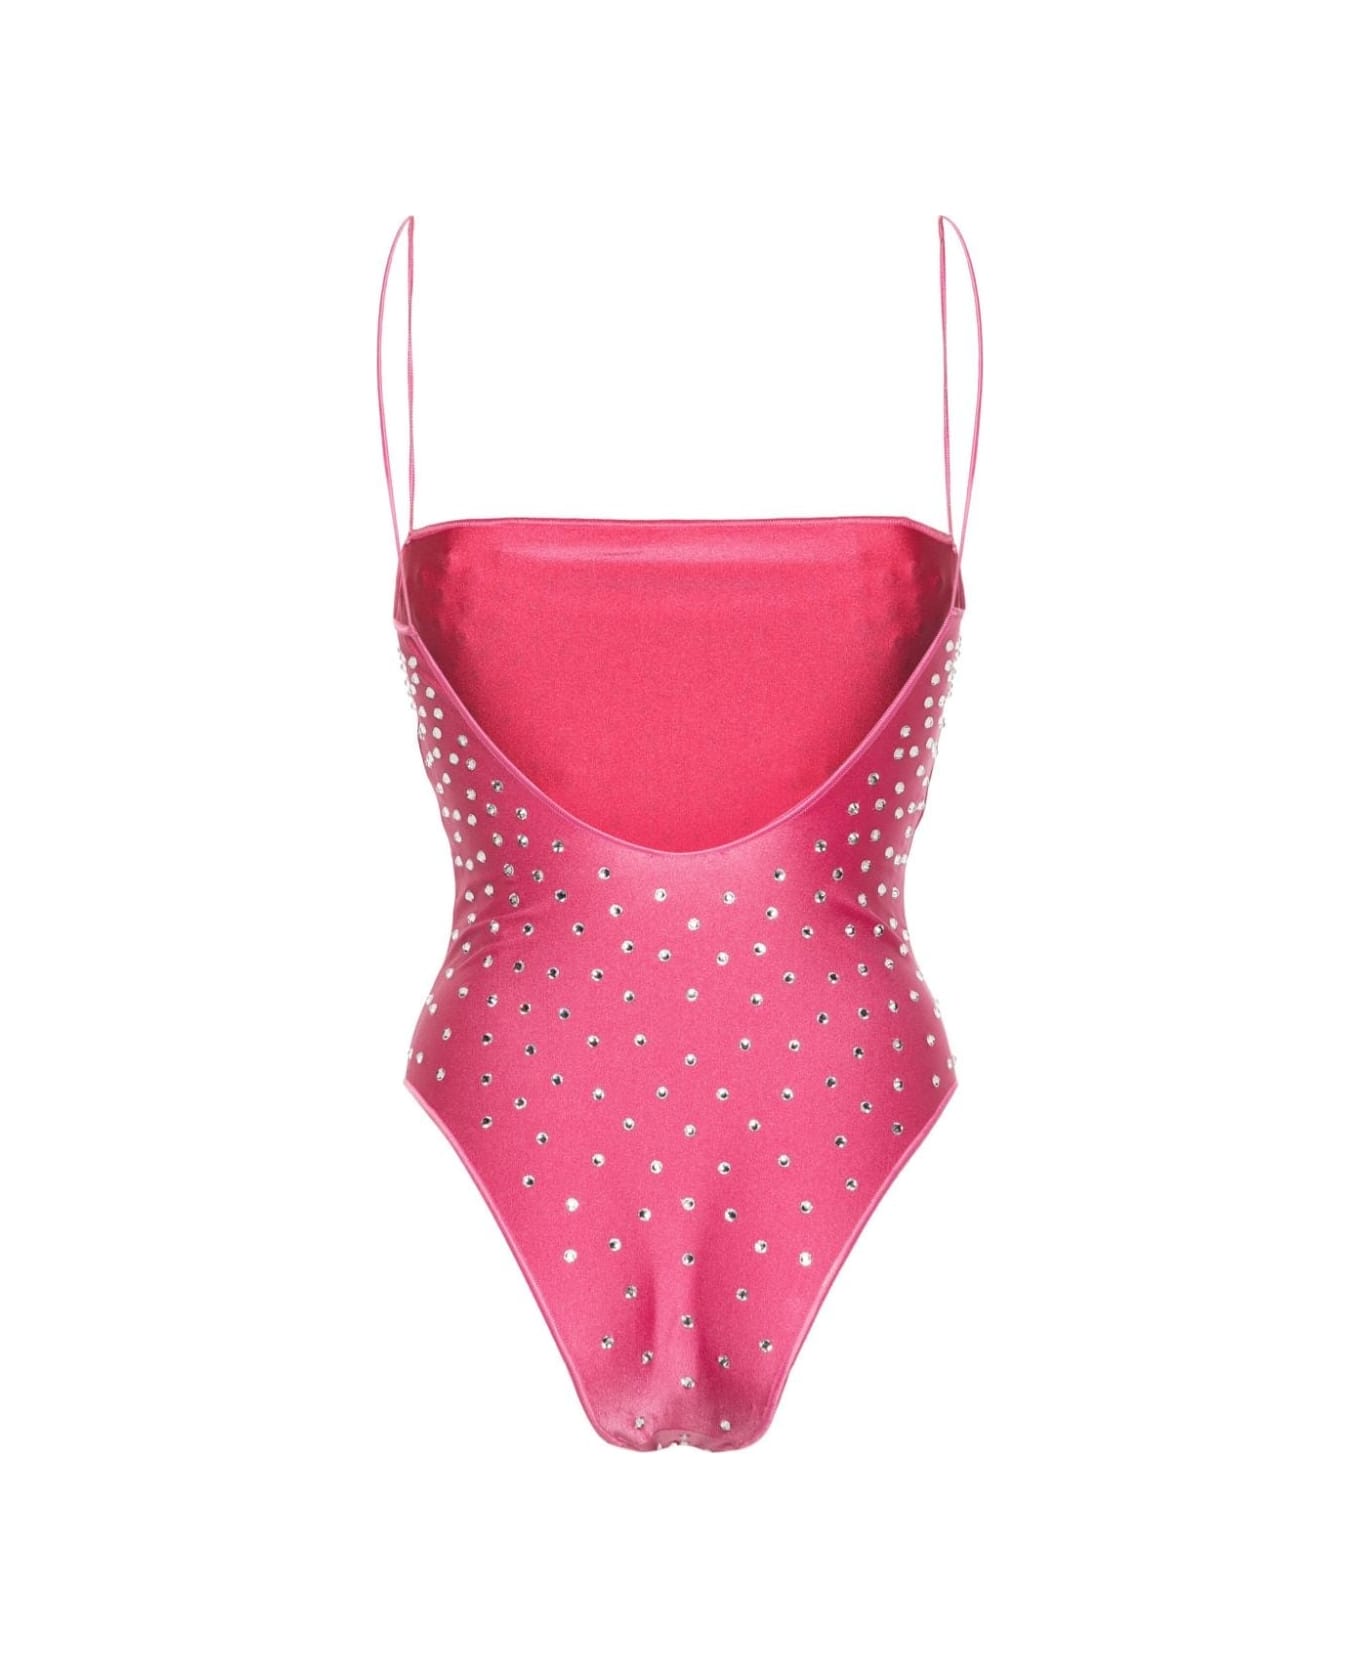 Oseree Flamingo Gem Maillot Swimsuit - Pink